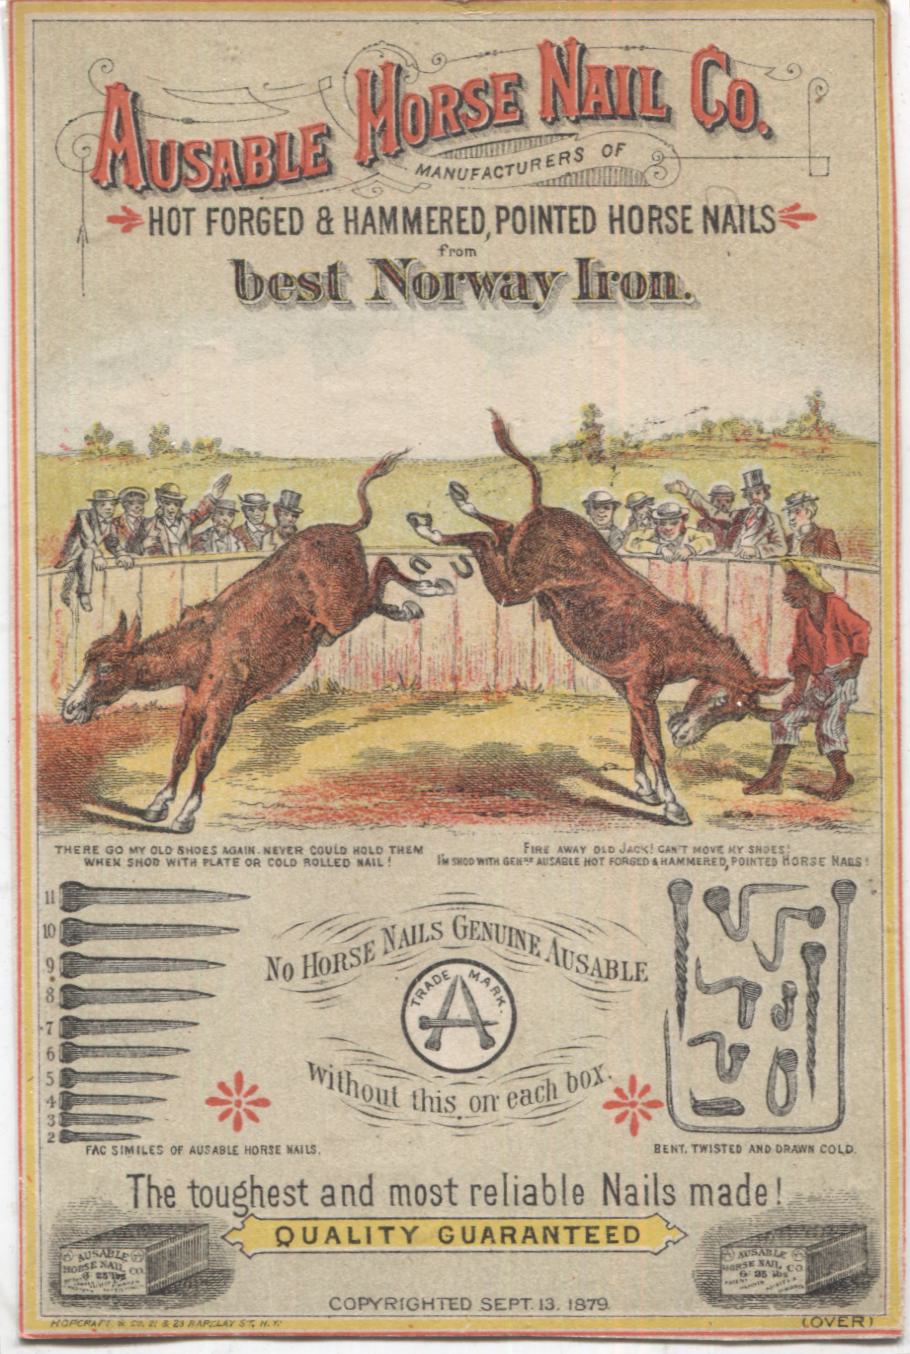 Ausable Horse Nail Co. Antique Trade Card, New Bedford, MA - 3" x 4.5"